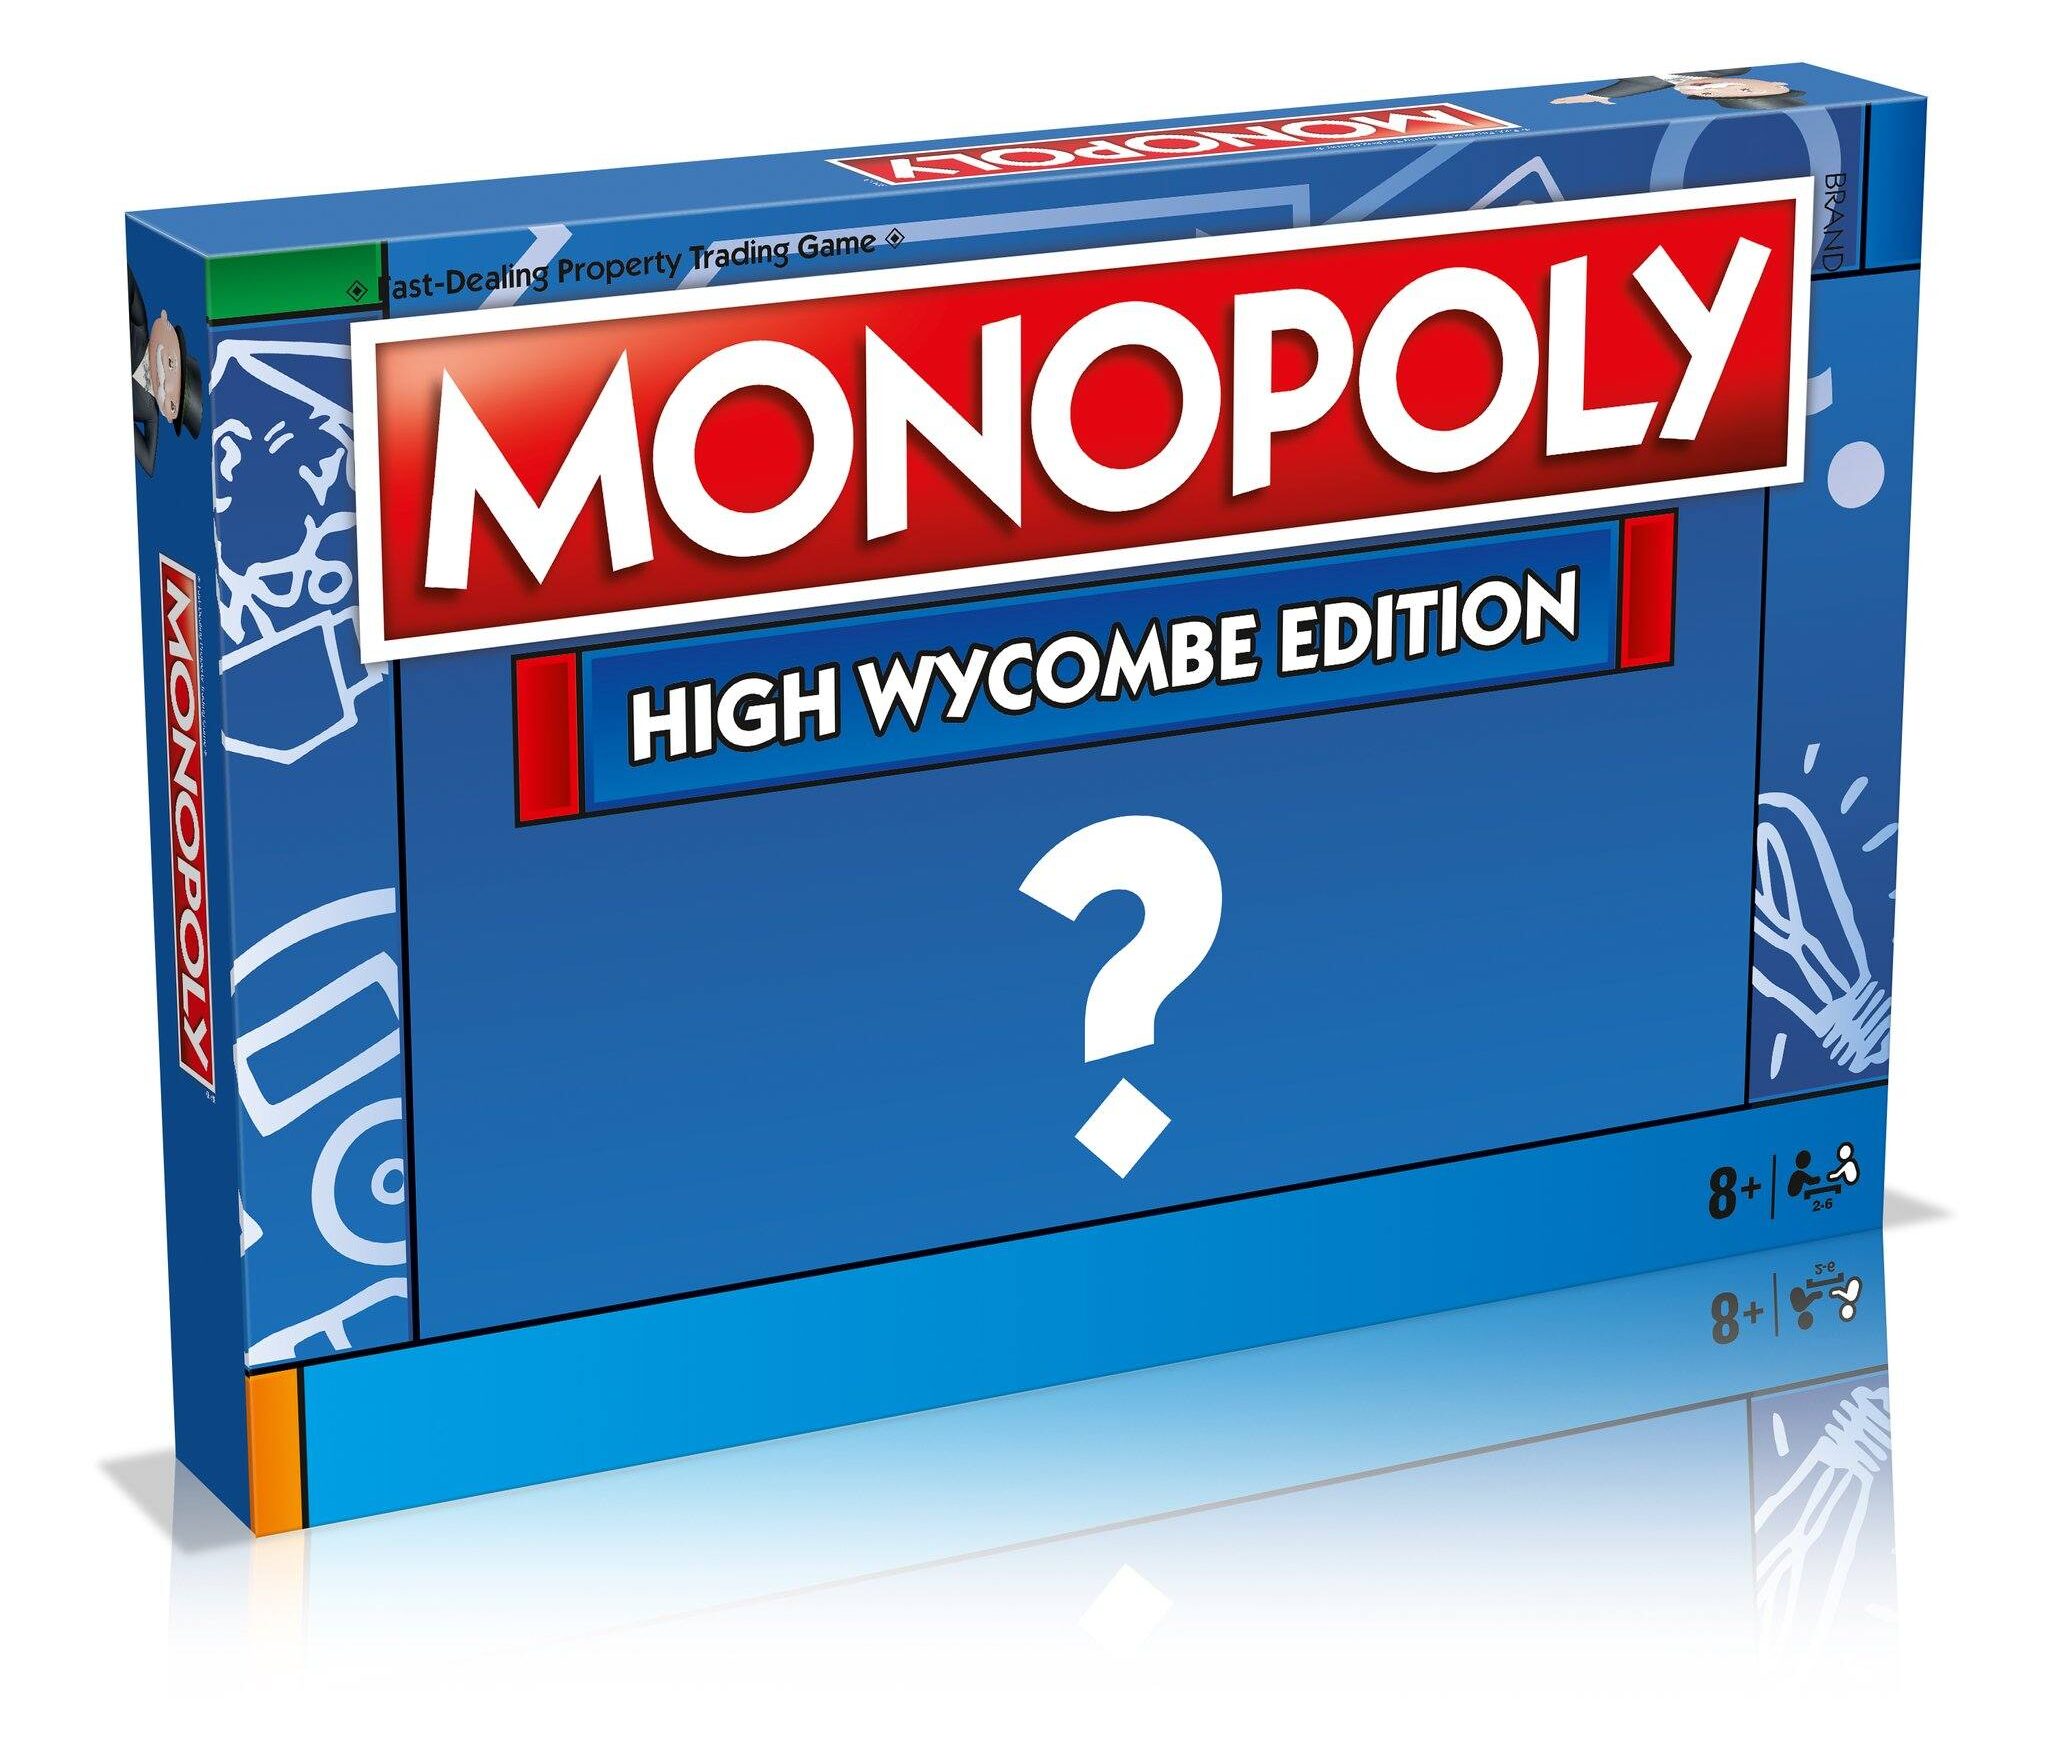 What High Wycombe destinations deserves a monopoly spot?